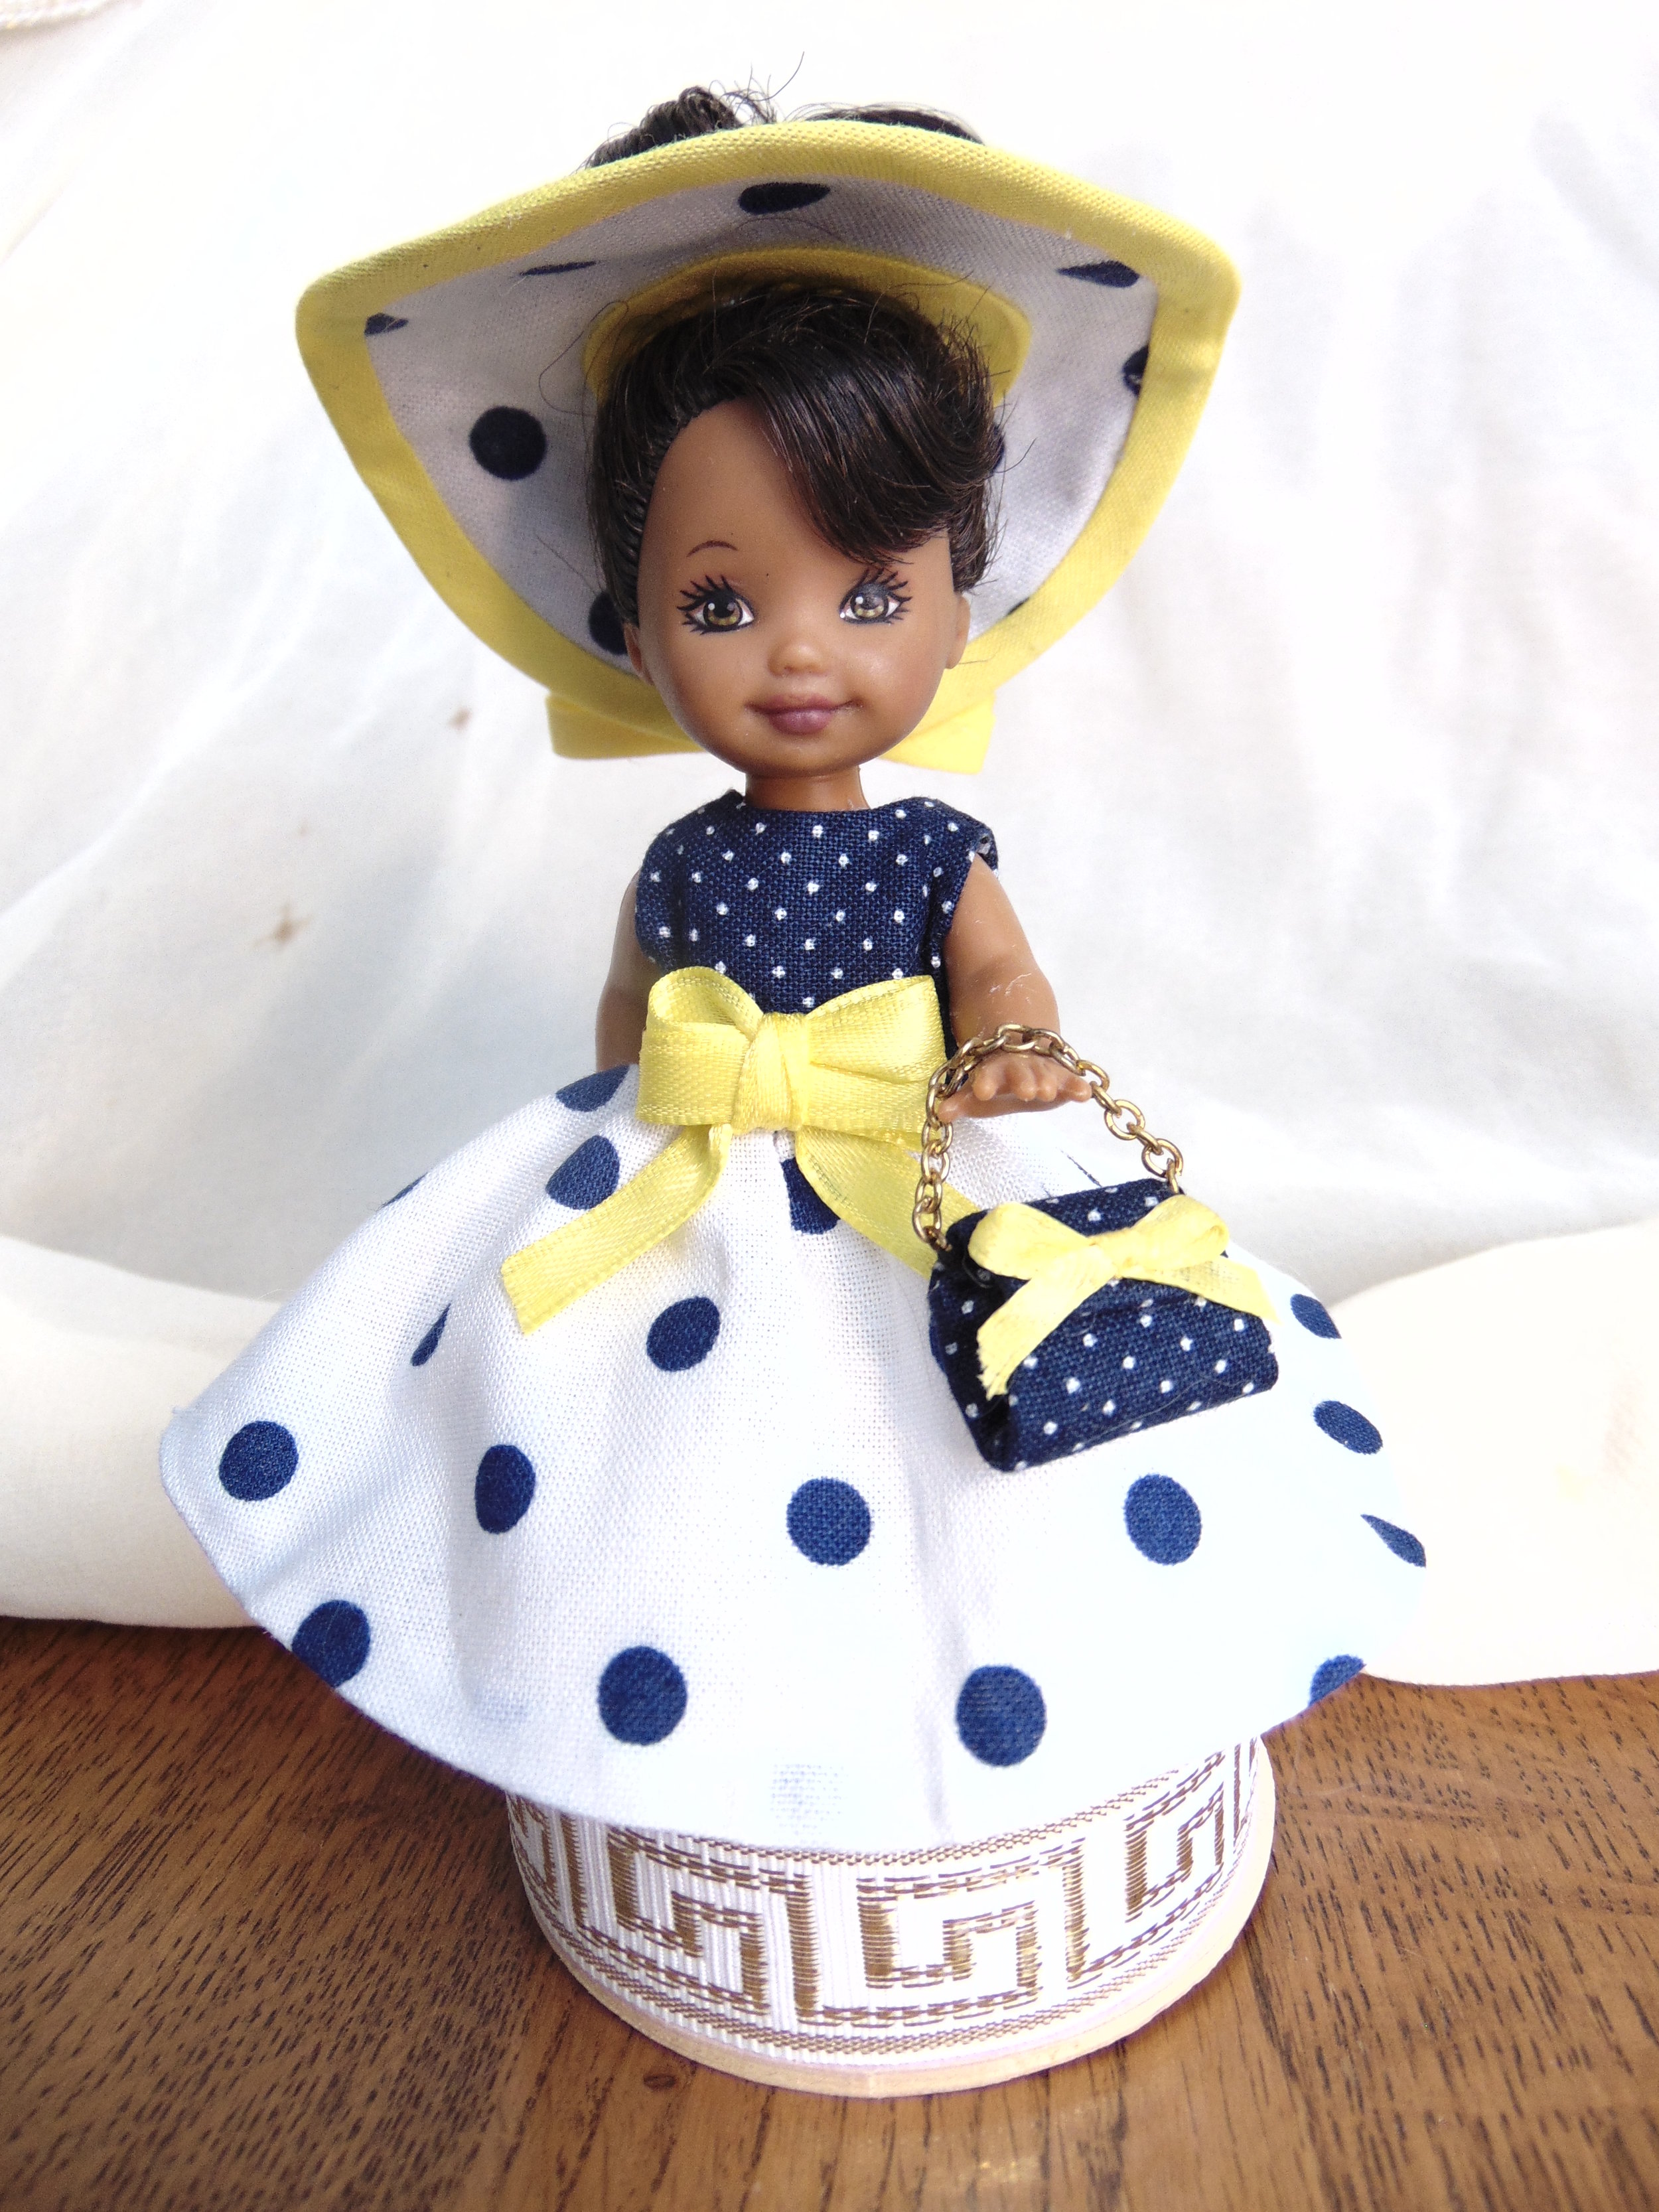 Handmade Kelly Doll Dresses and Accessories by JMB Designs